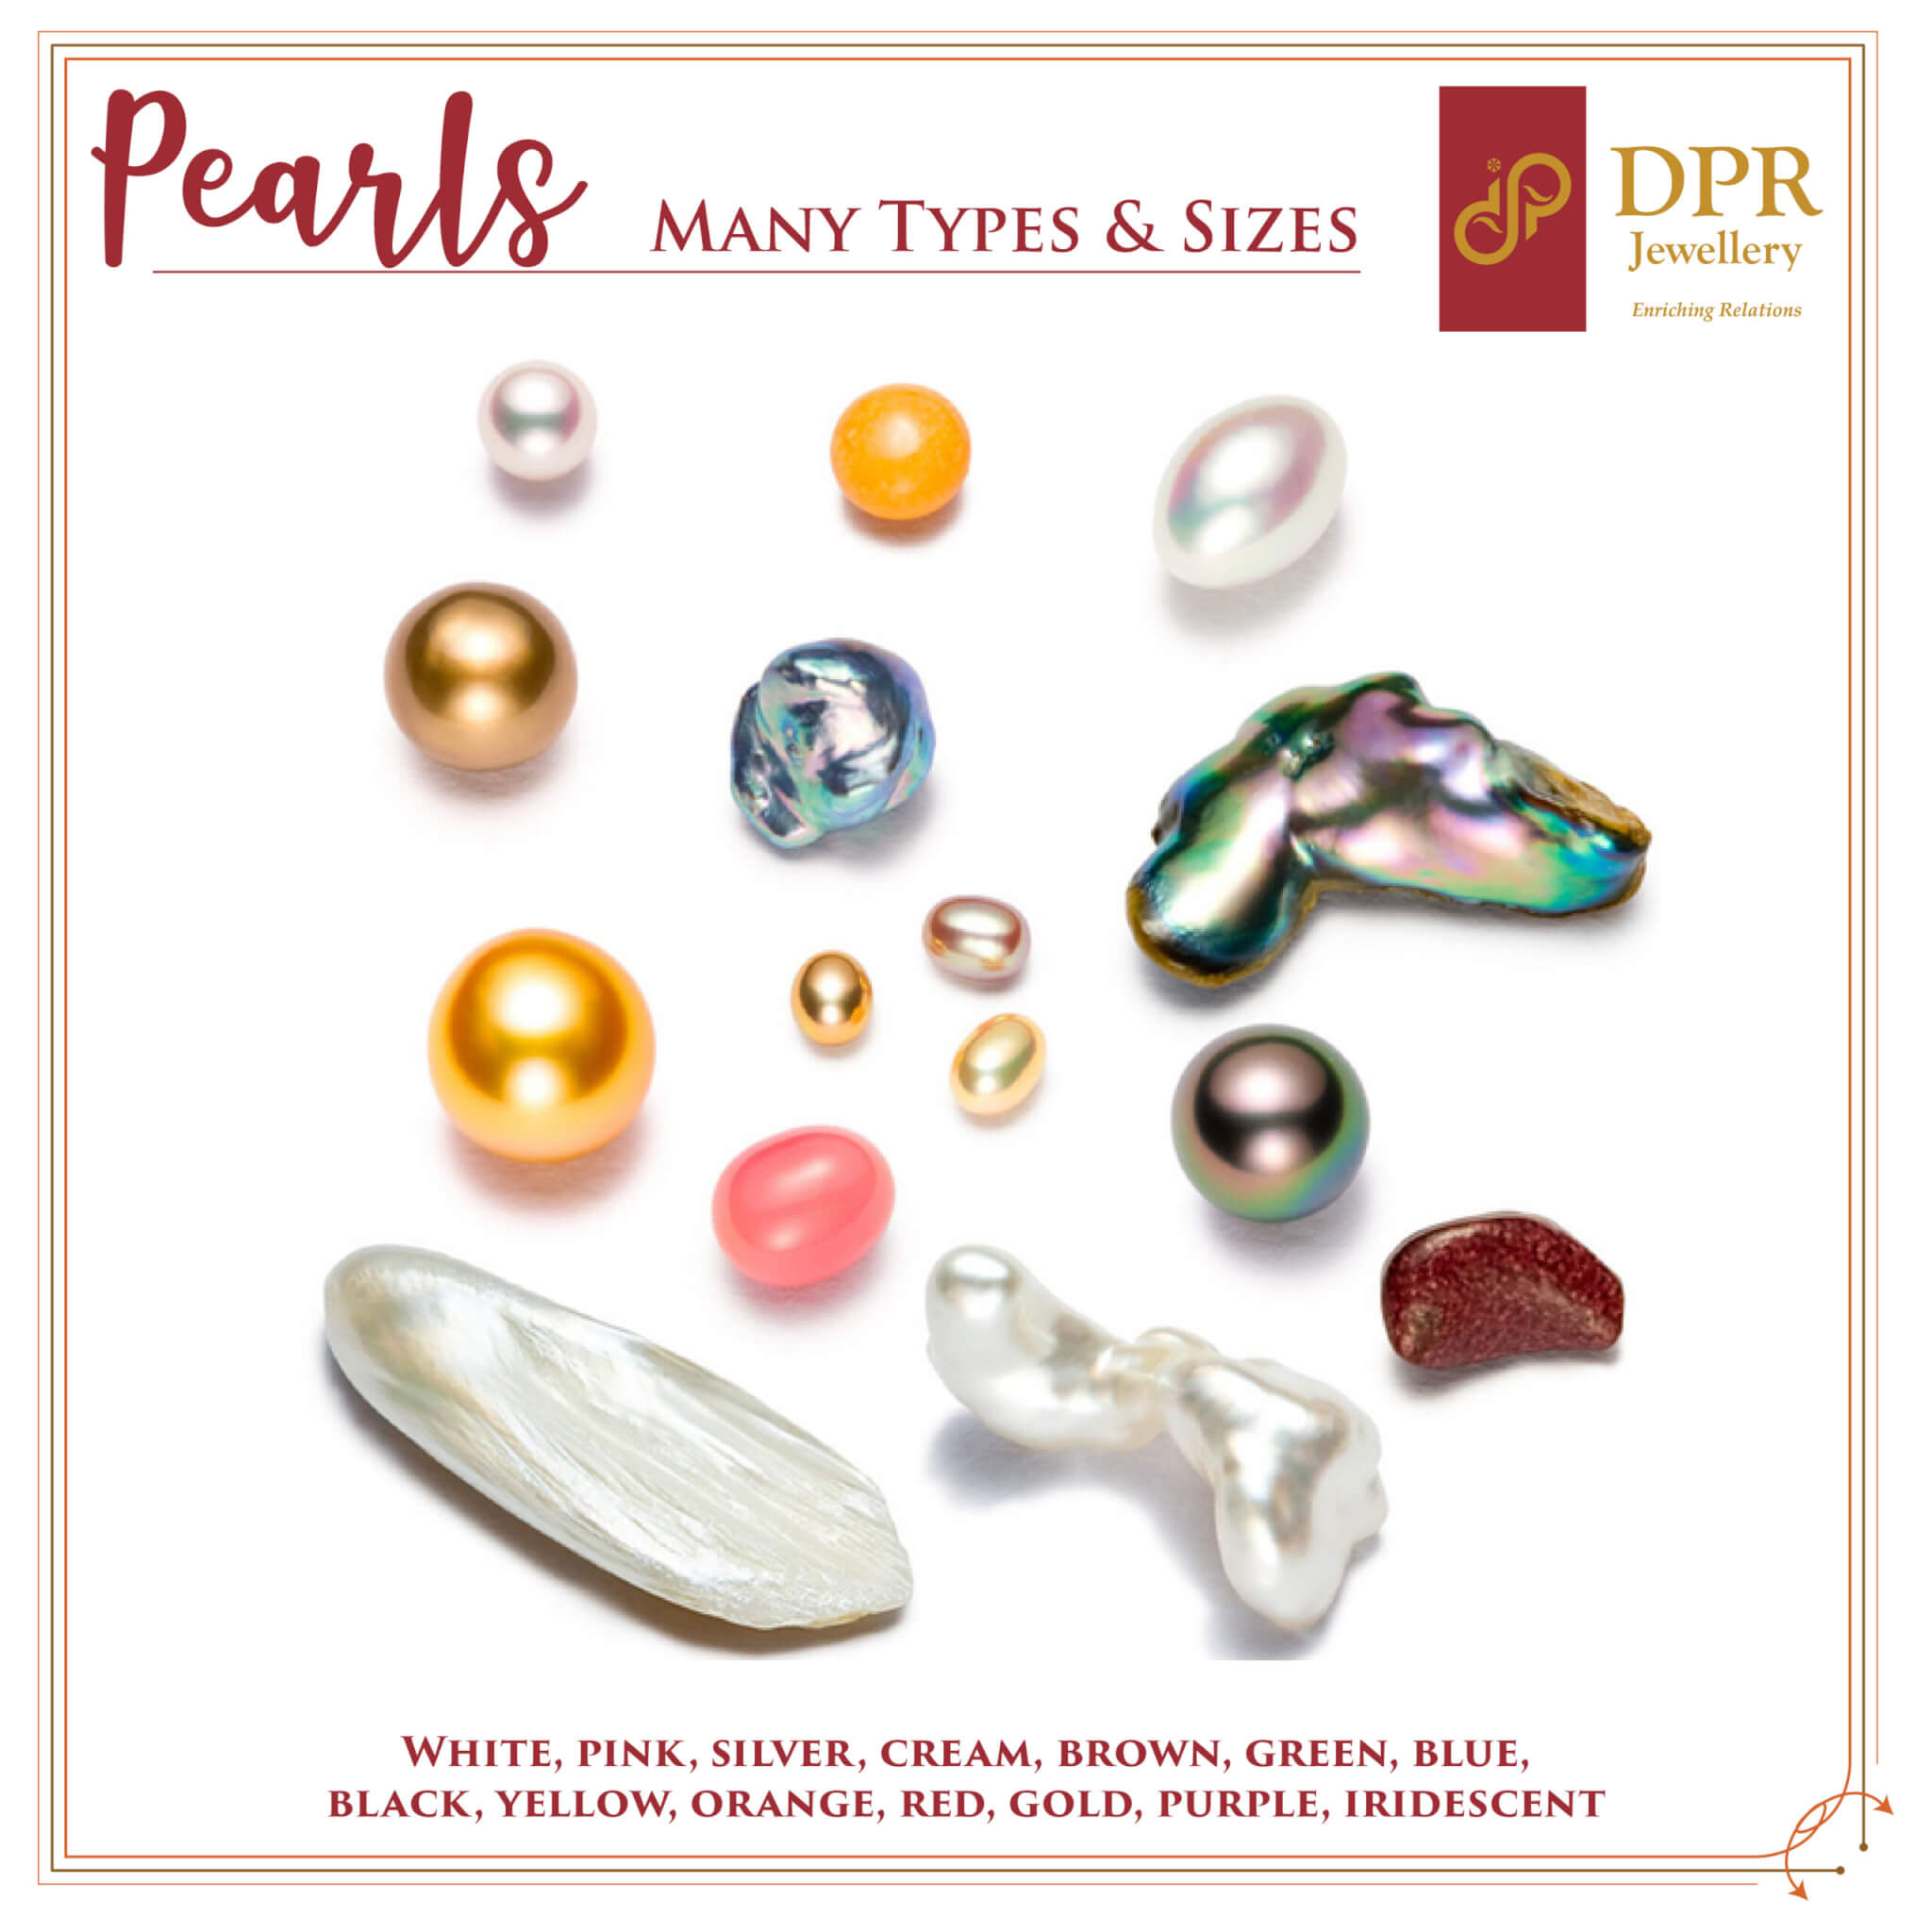 Different types of Pearls and shapes of Pearls by DPR Jewellery available today